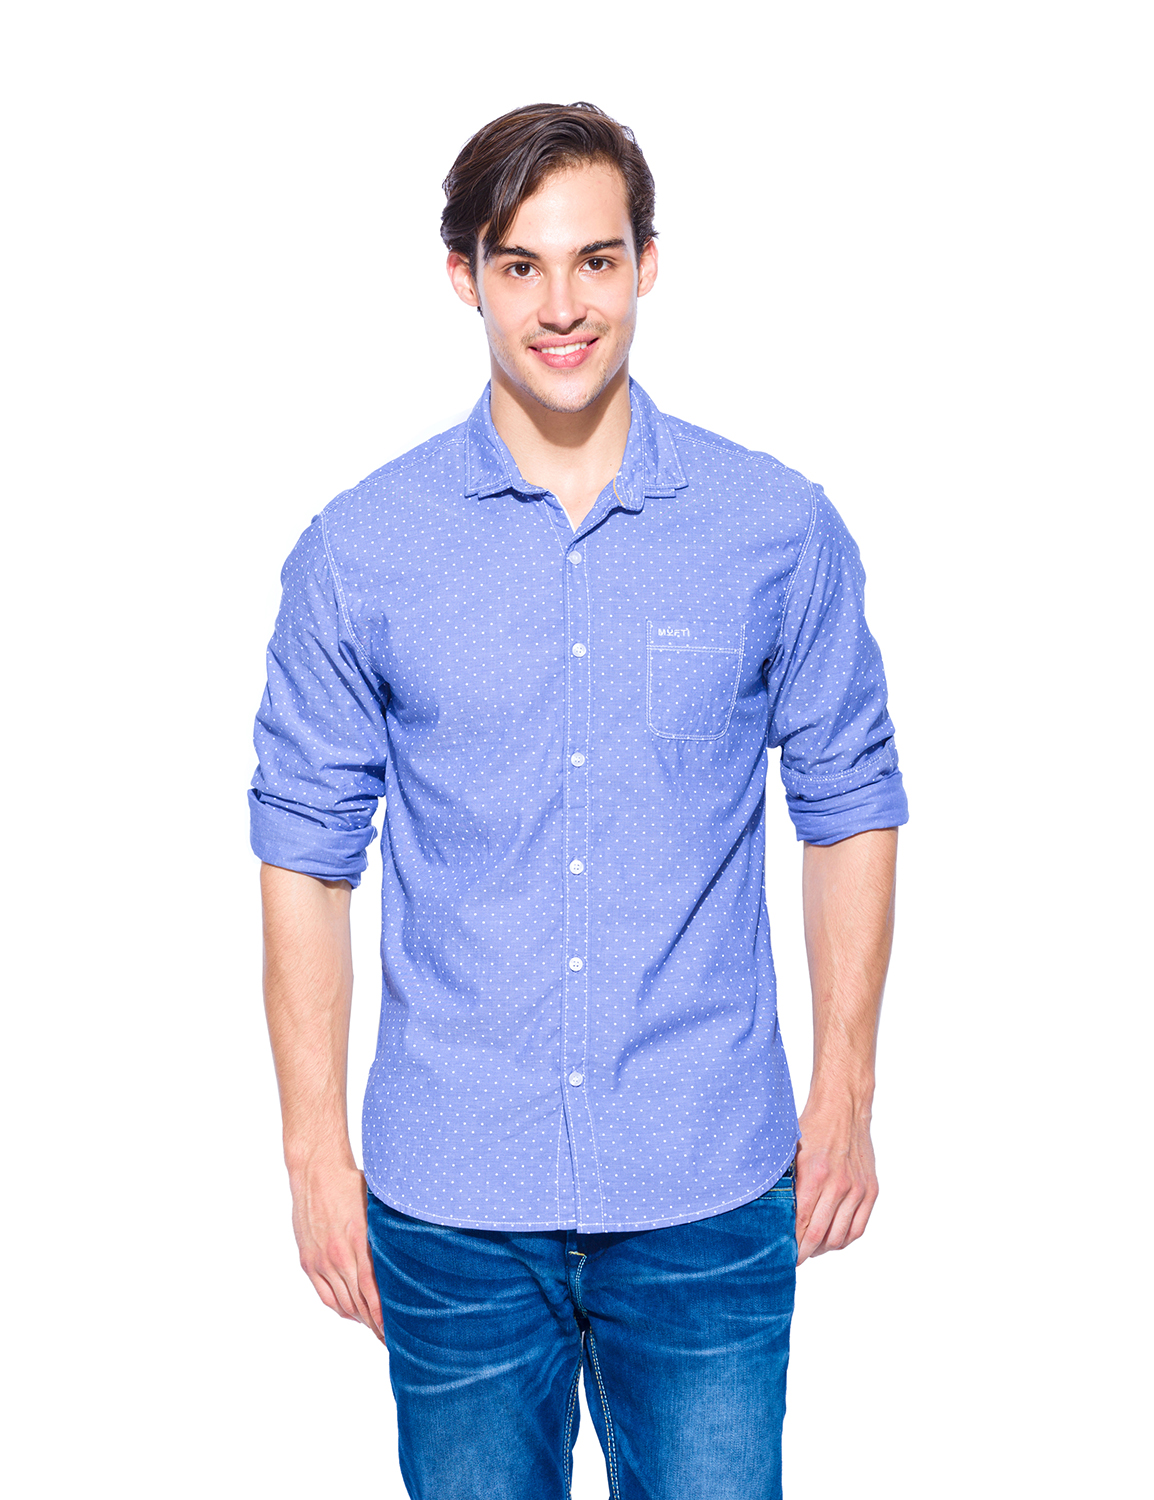 Buy Mufti Mens Blue Slim Fit Casual Shirts Online @ ₹924 from ShopClues